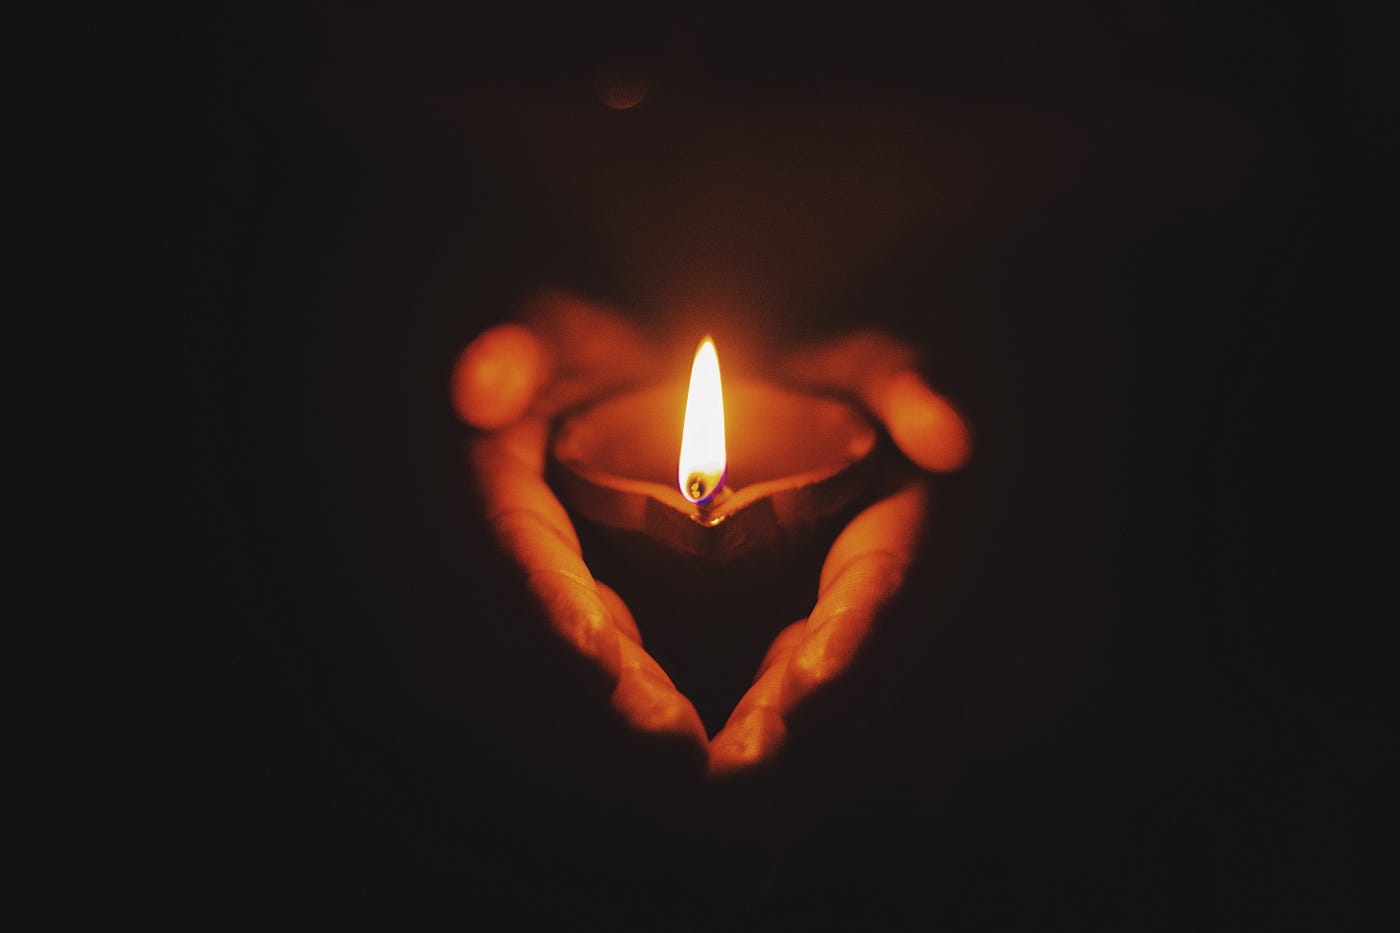 A Candle For The Dead. A poem | by Imad | ILLUMINATION | Medium